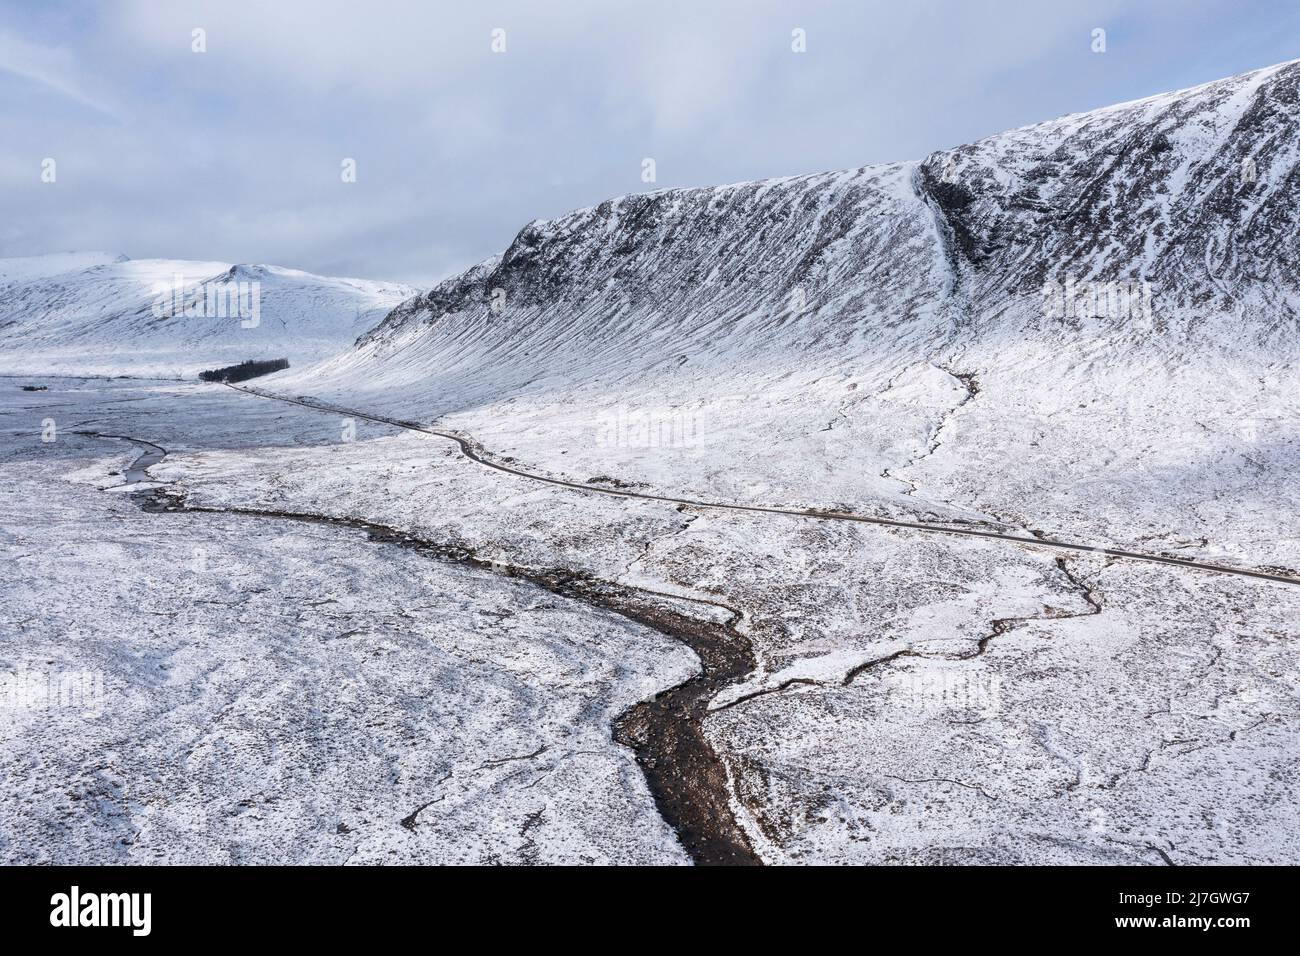 Stunning aerial drone panorama landscape image of Stob Dearg and Glencoe in Scottish Highlands during deep snowfall and beautiful blue skies Stock Photo